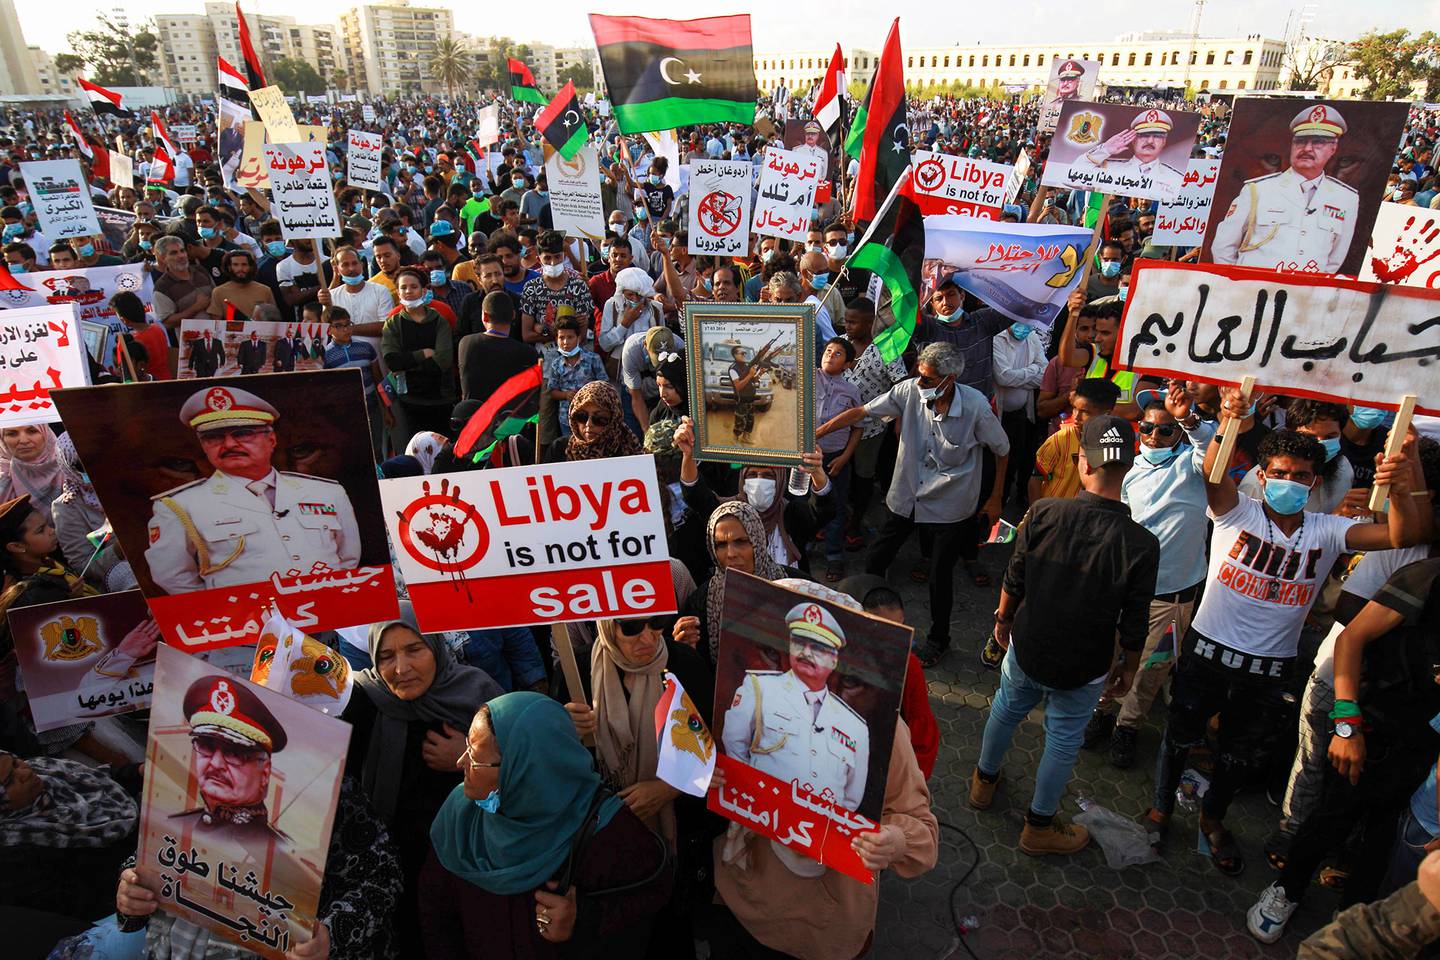 Supporters of Libyan military strongman Khalifa Haftar take part in a gathering in the eastern Libyan port city of Benghazi on July 5, 2020, to protest against Turkish intervention in the country's affairs.